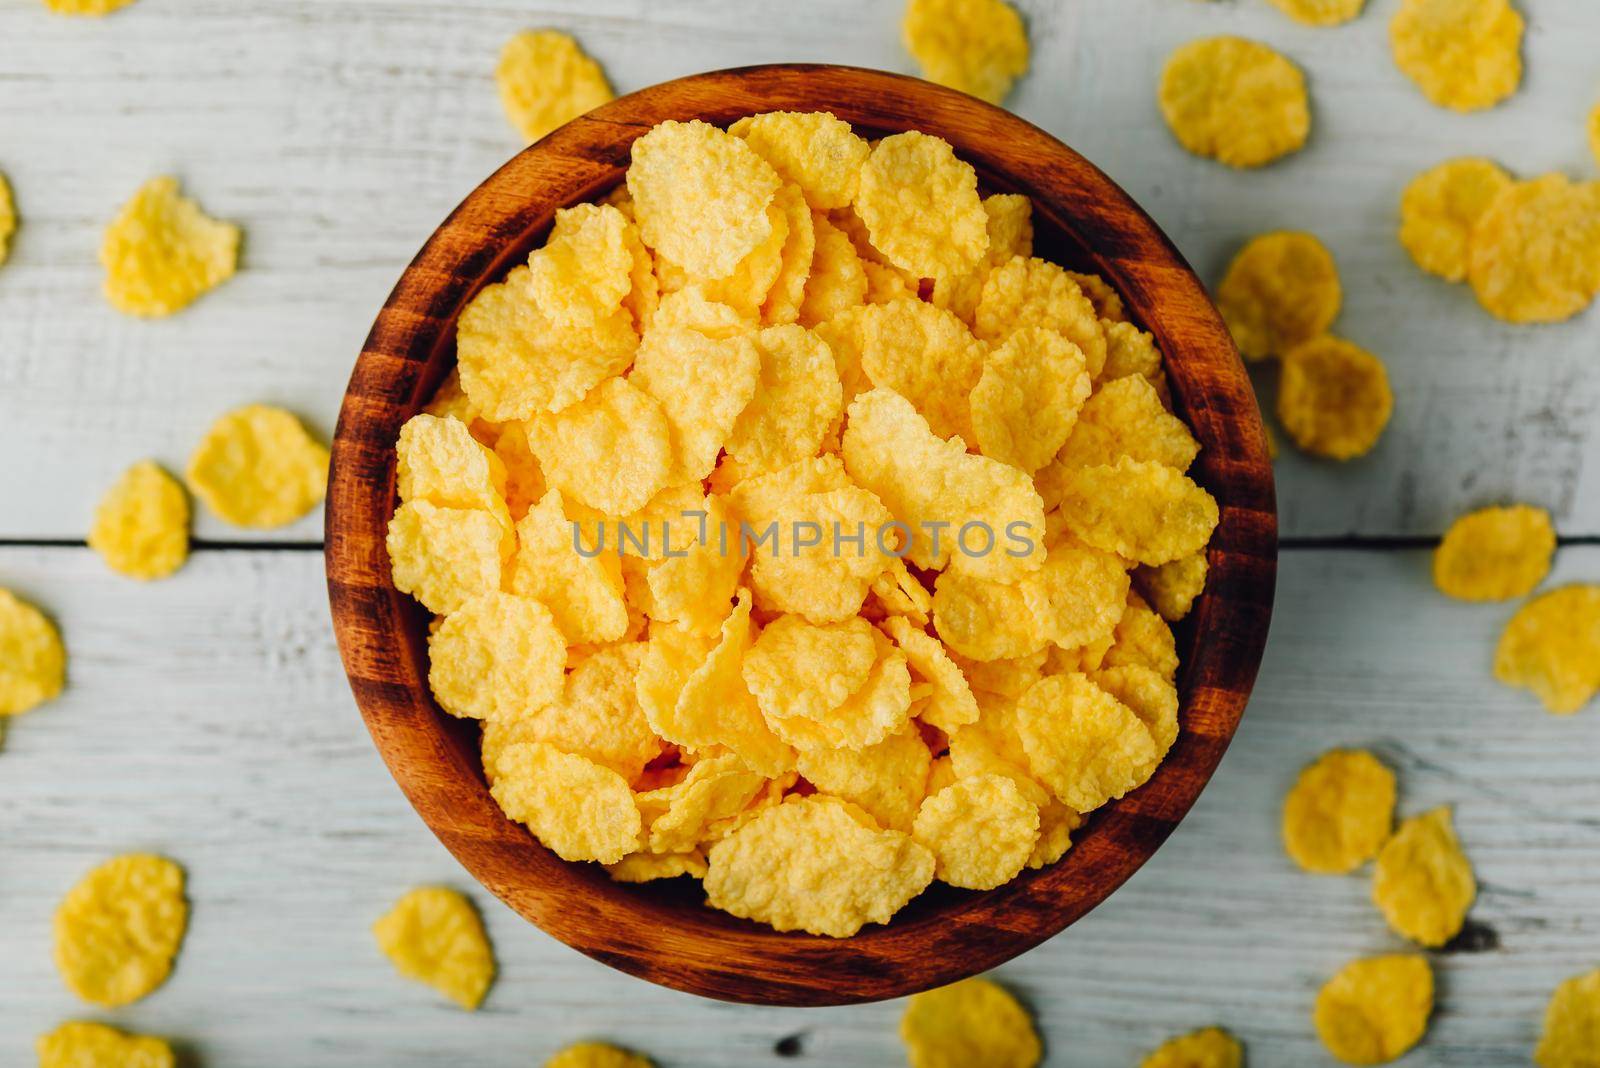 Rustic bowl of cornflakes over wooden surface. View from above